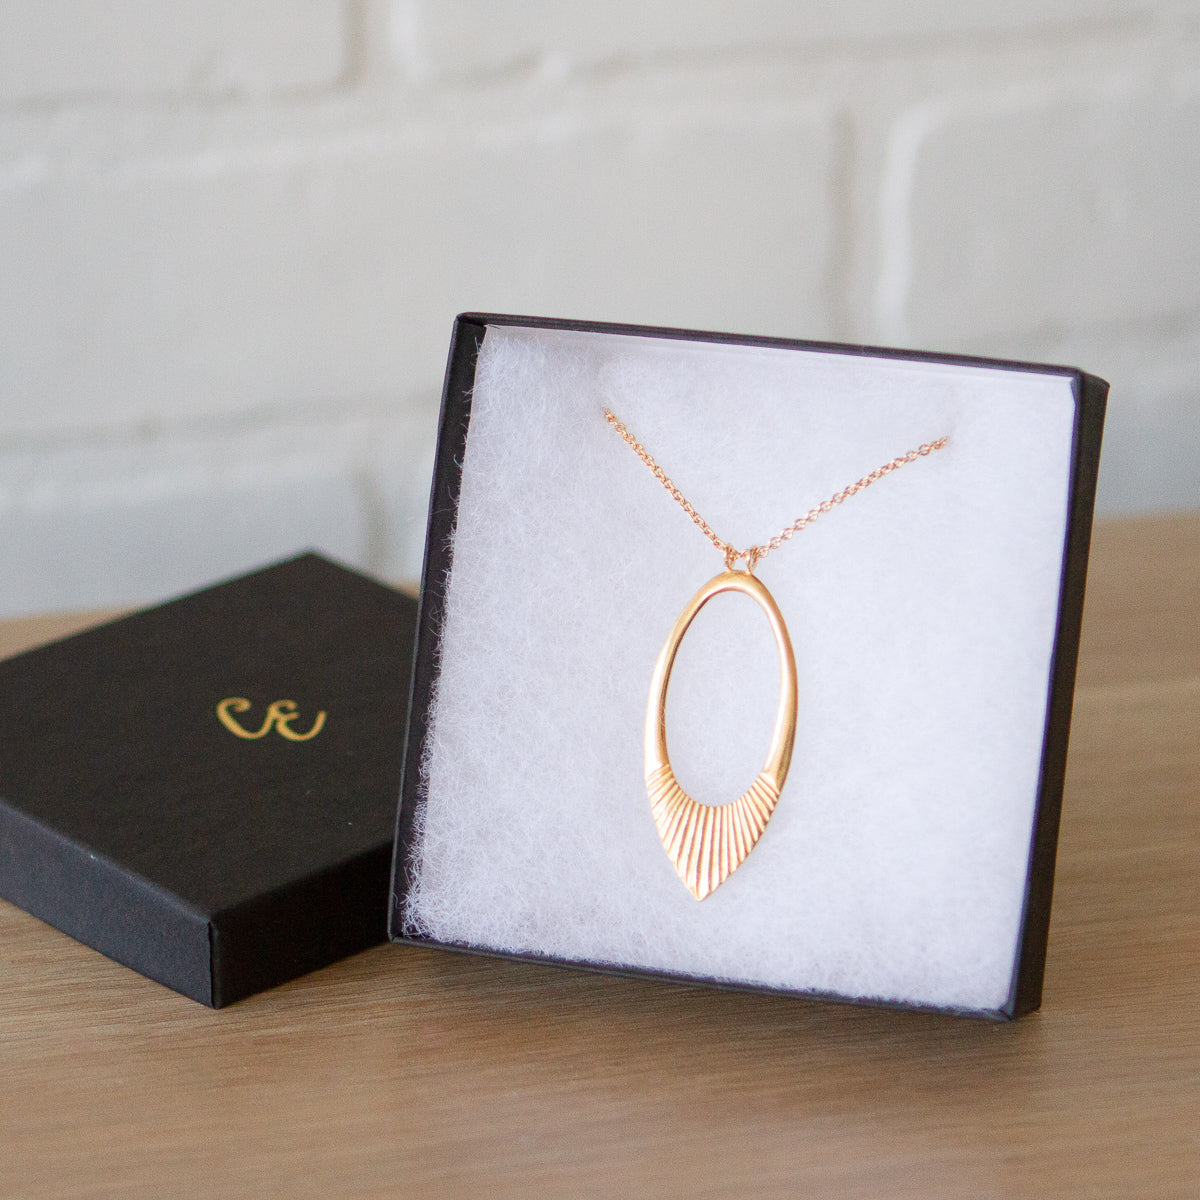 Ectra long neckalce with large open petal shape pendant with carved ray texture across the bottom in a gift box